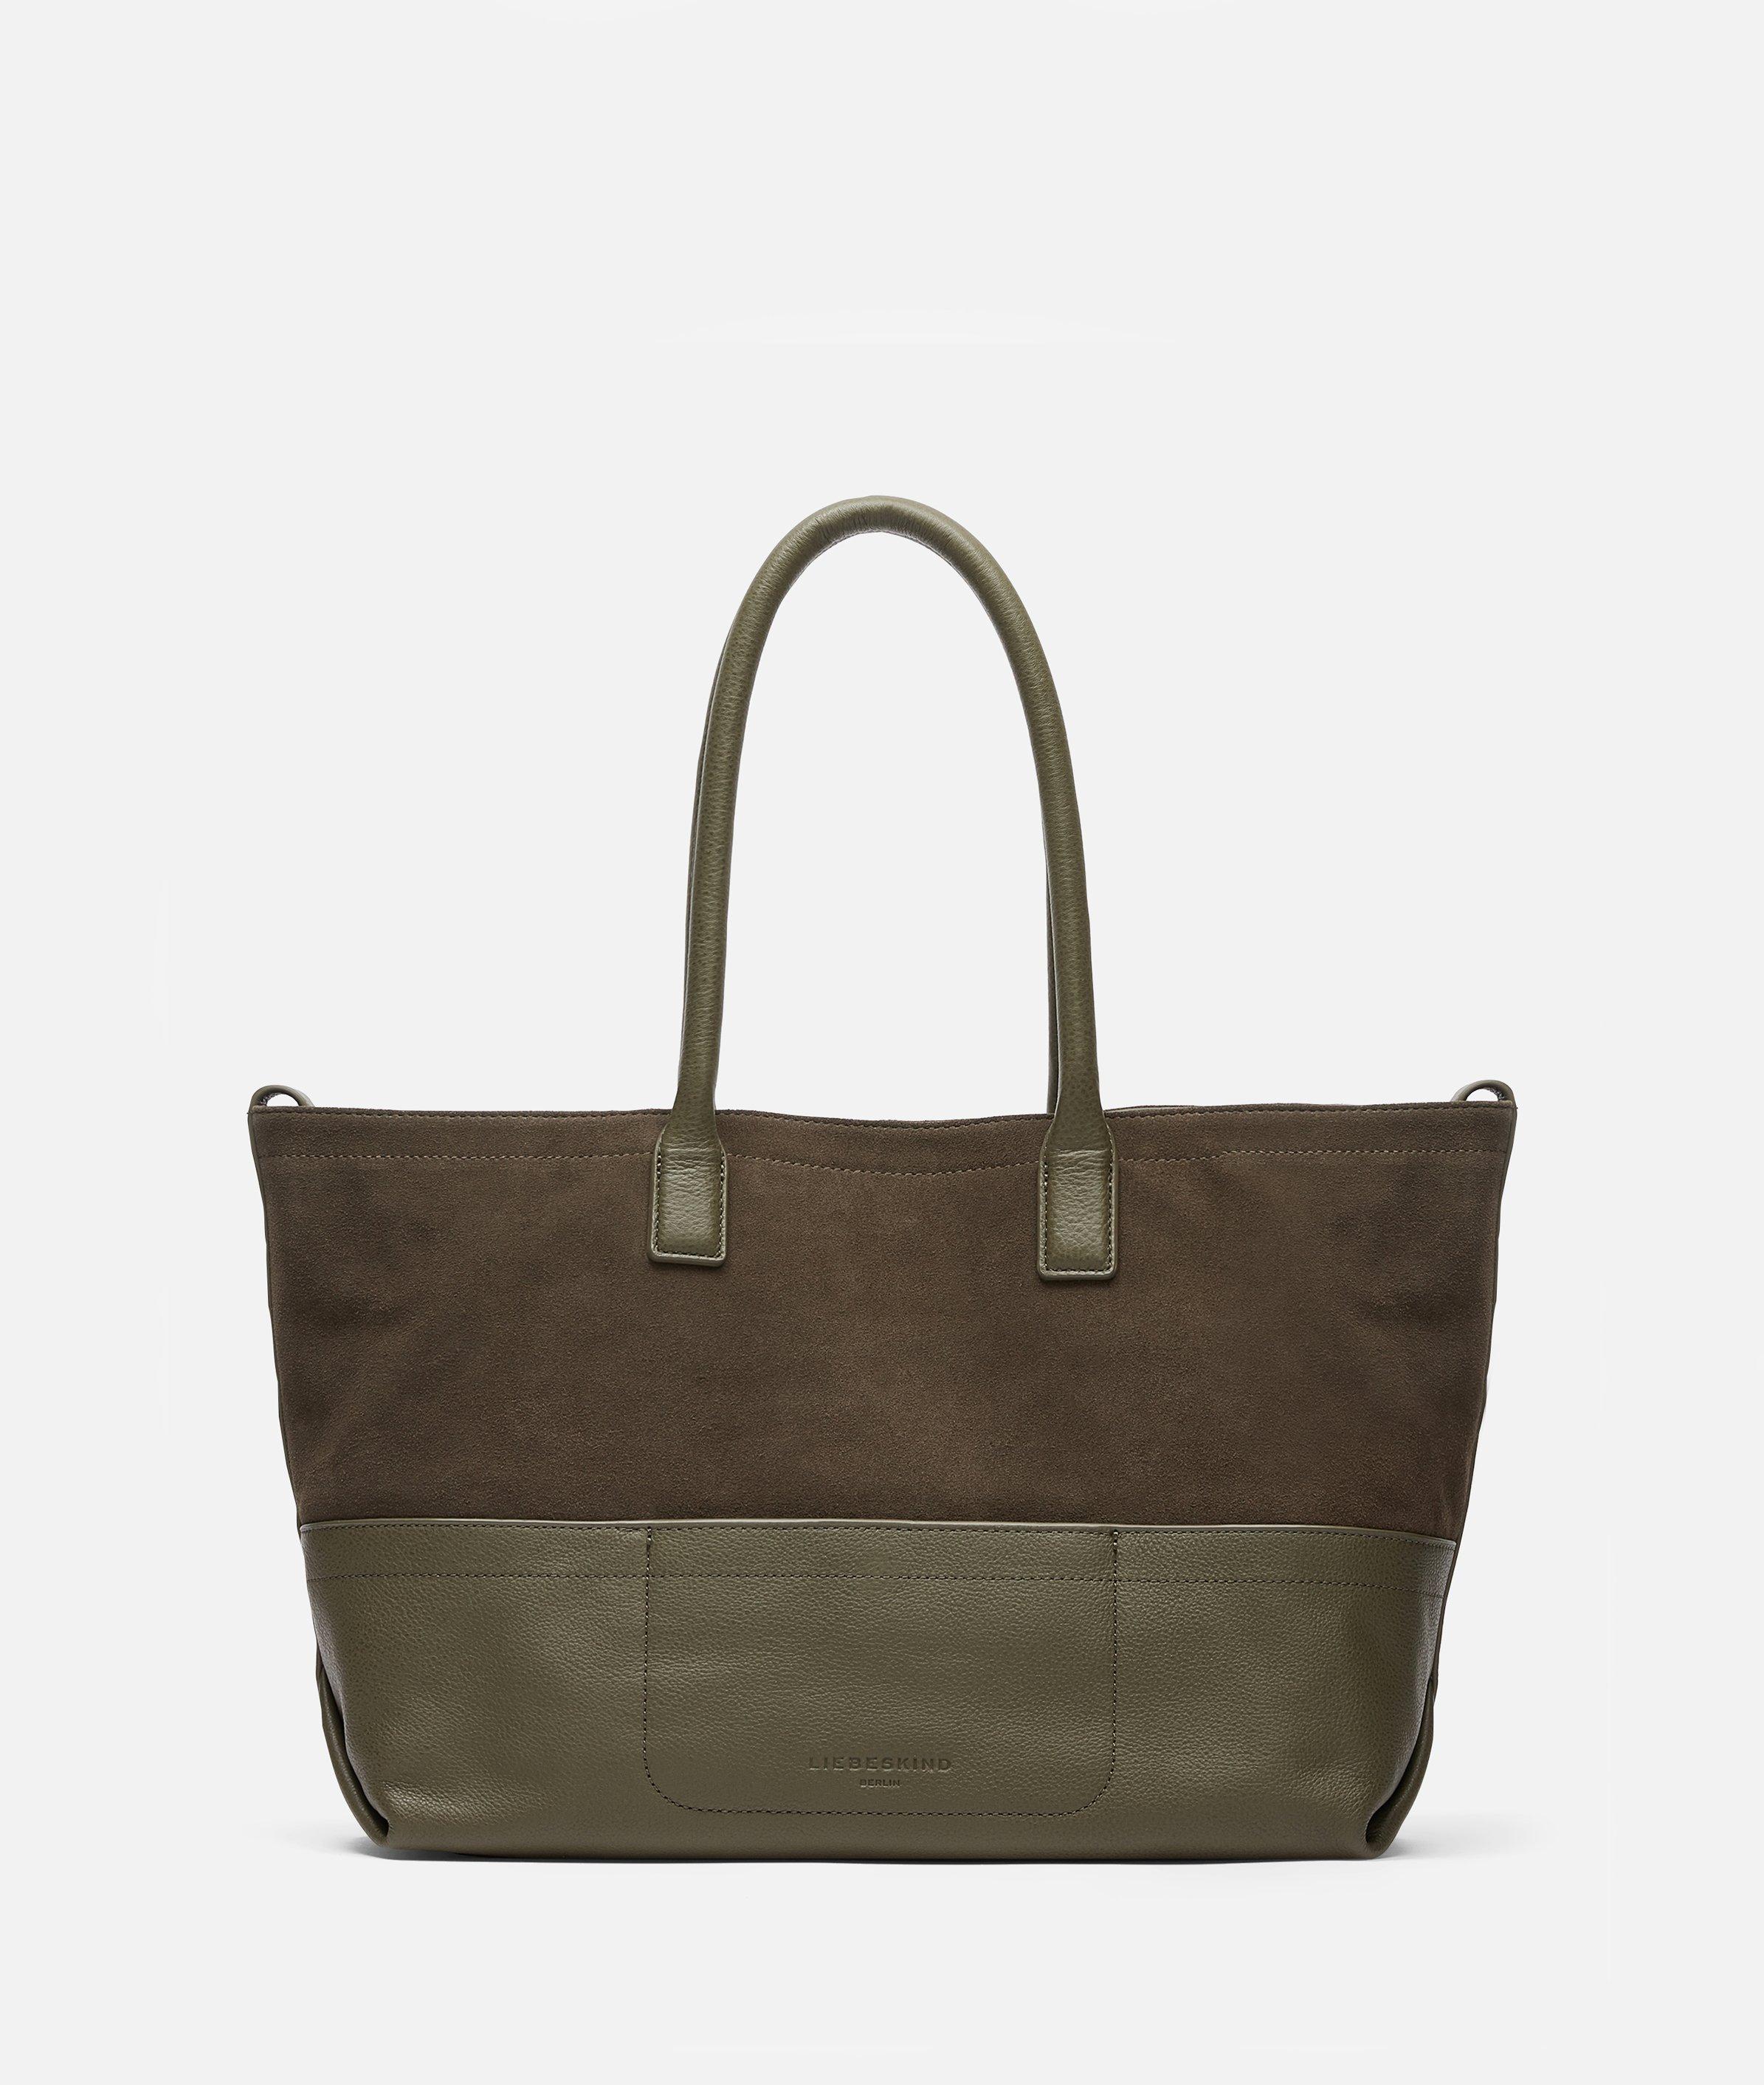 New bags, purses and accessories from LIEBESKIND Berlin